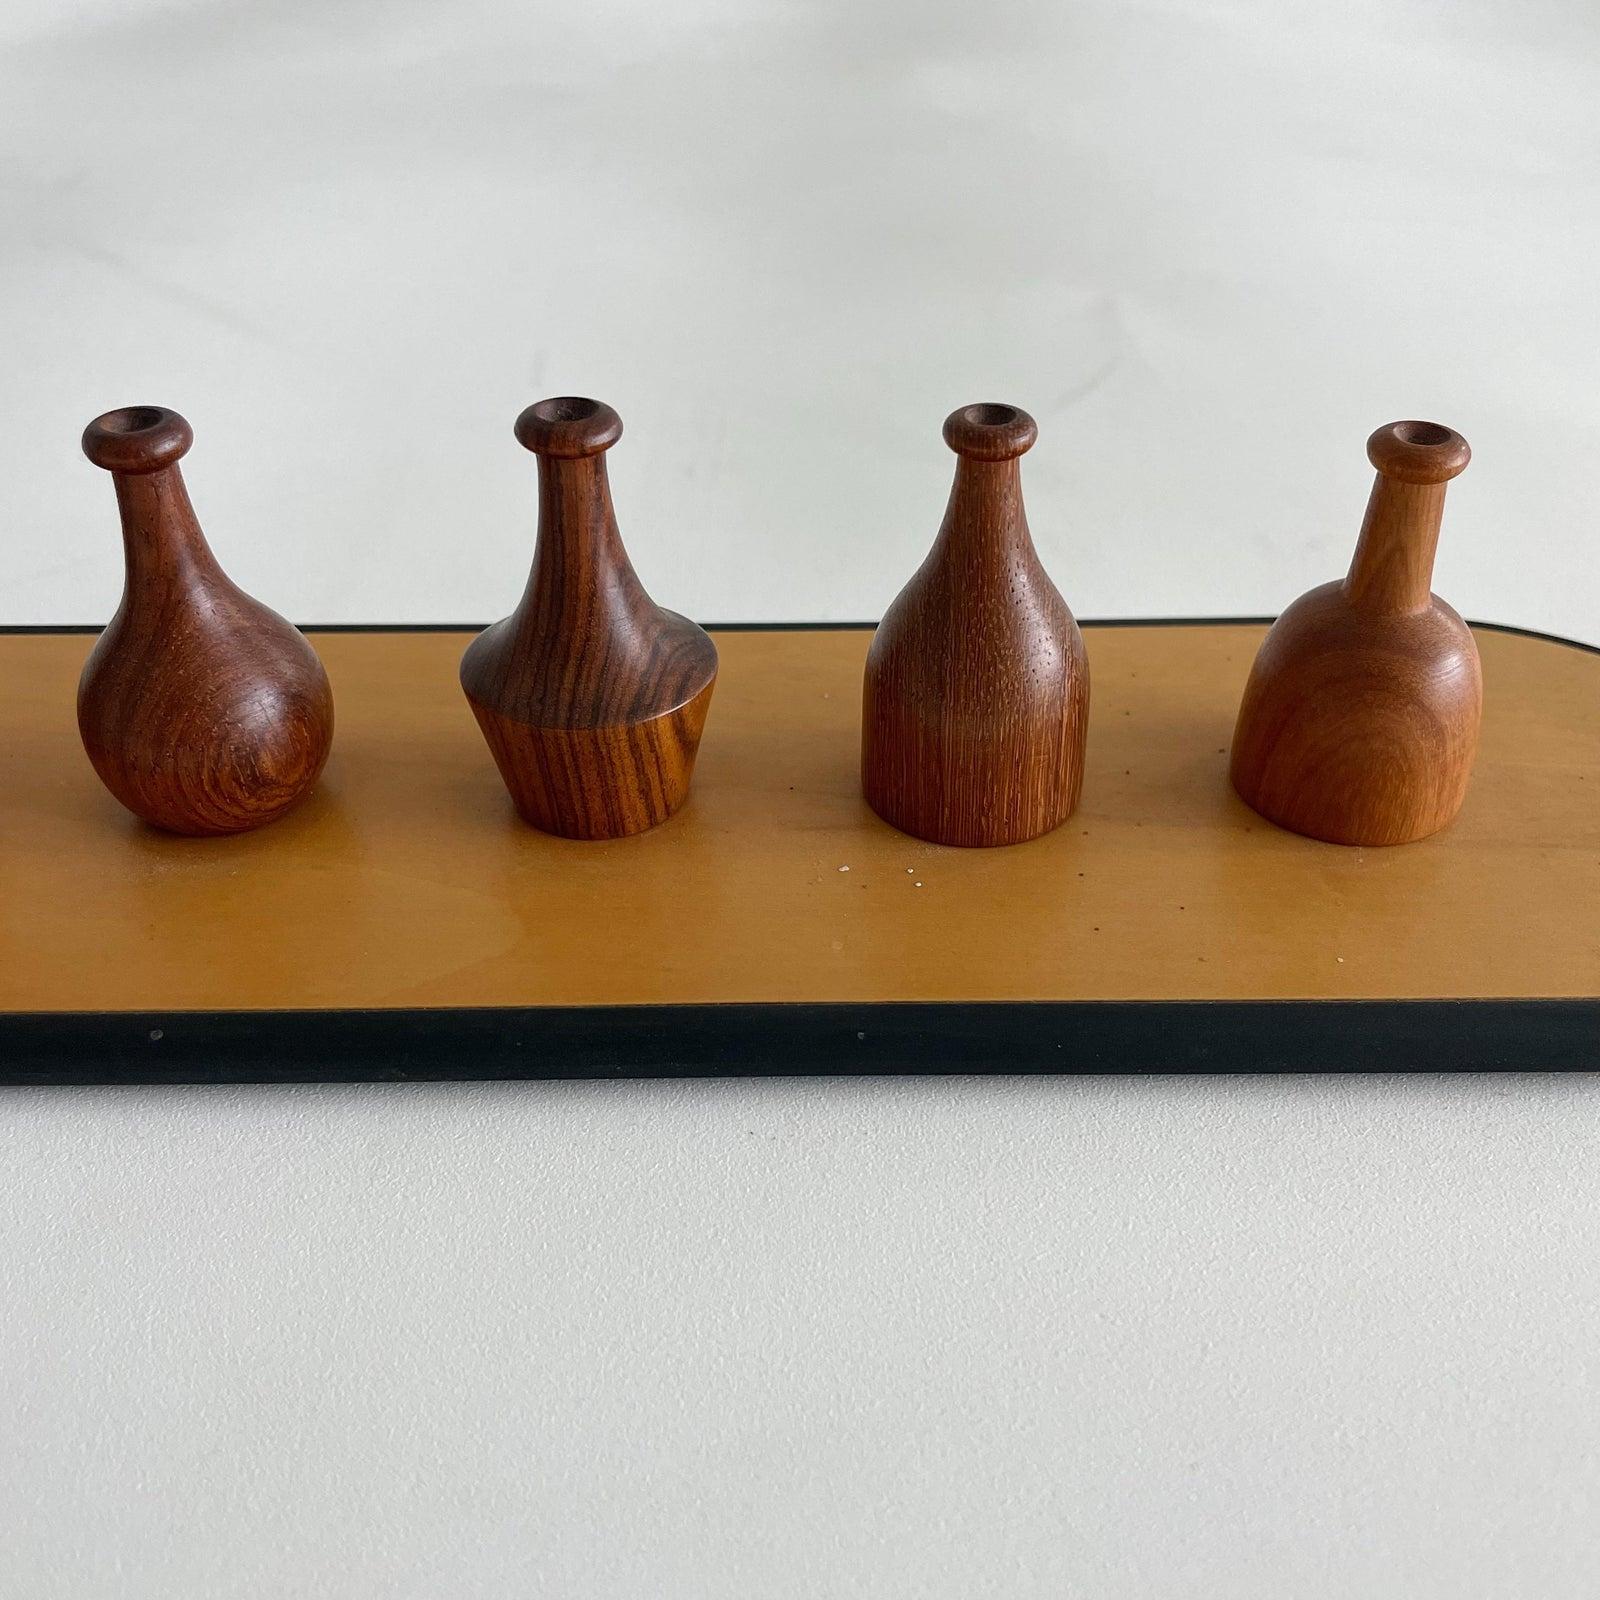 Giorgio Pizzitutti Exotic Wood Miniature Vases Sculpture Italy 1980's For Sale 3